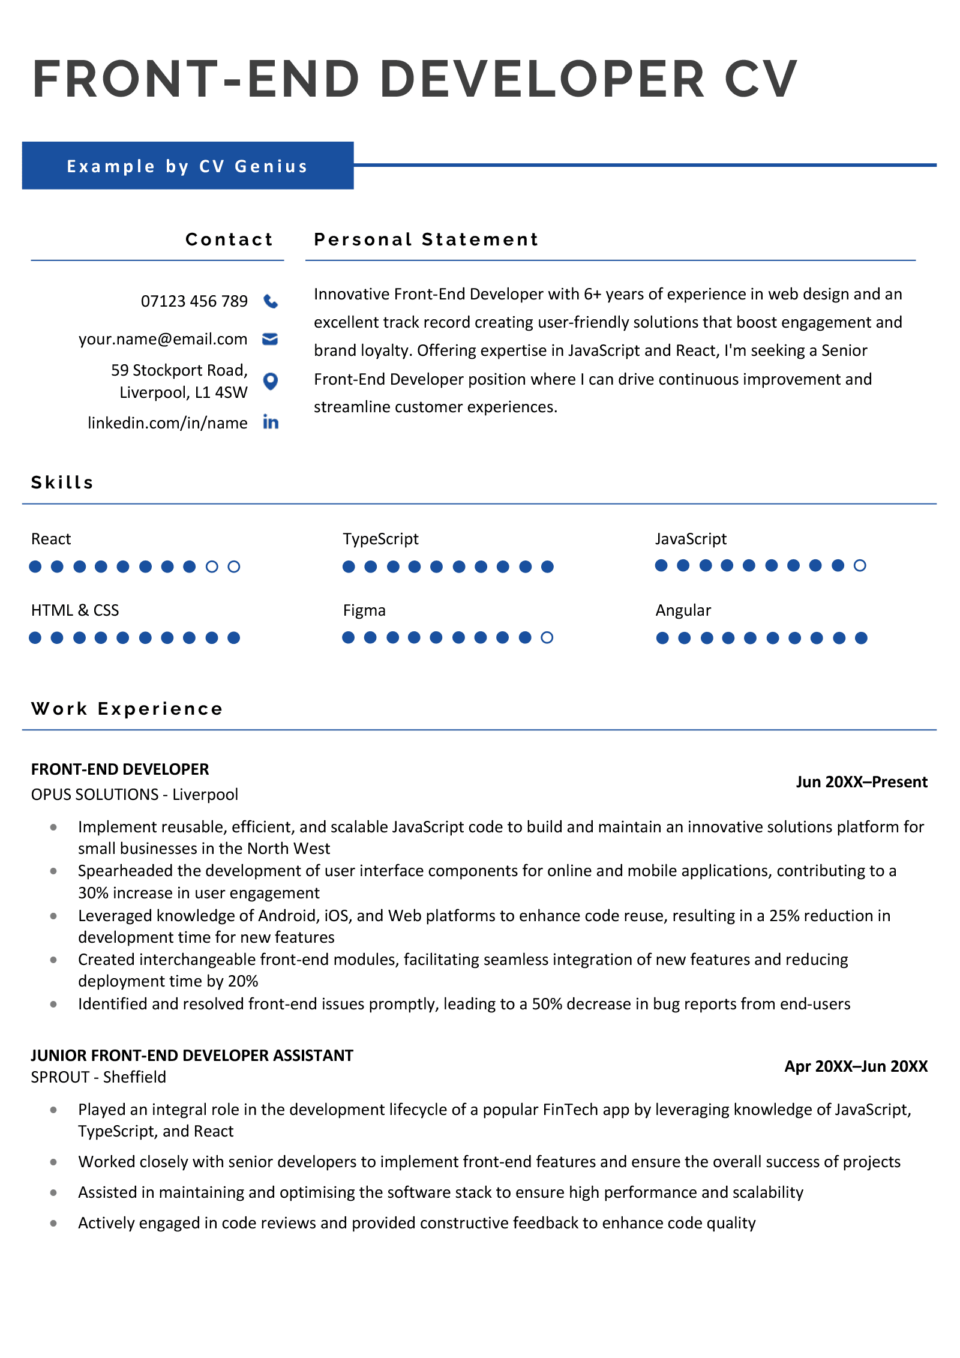 An example front-end developer CV with dark blue section dividers and graphic elements to highlight the applicants different programming skills.